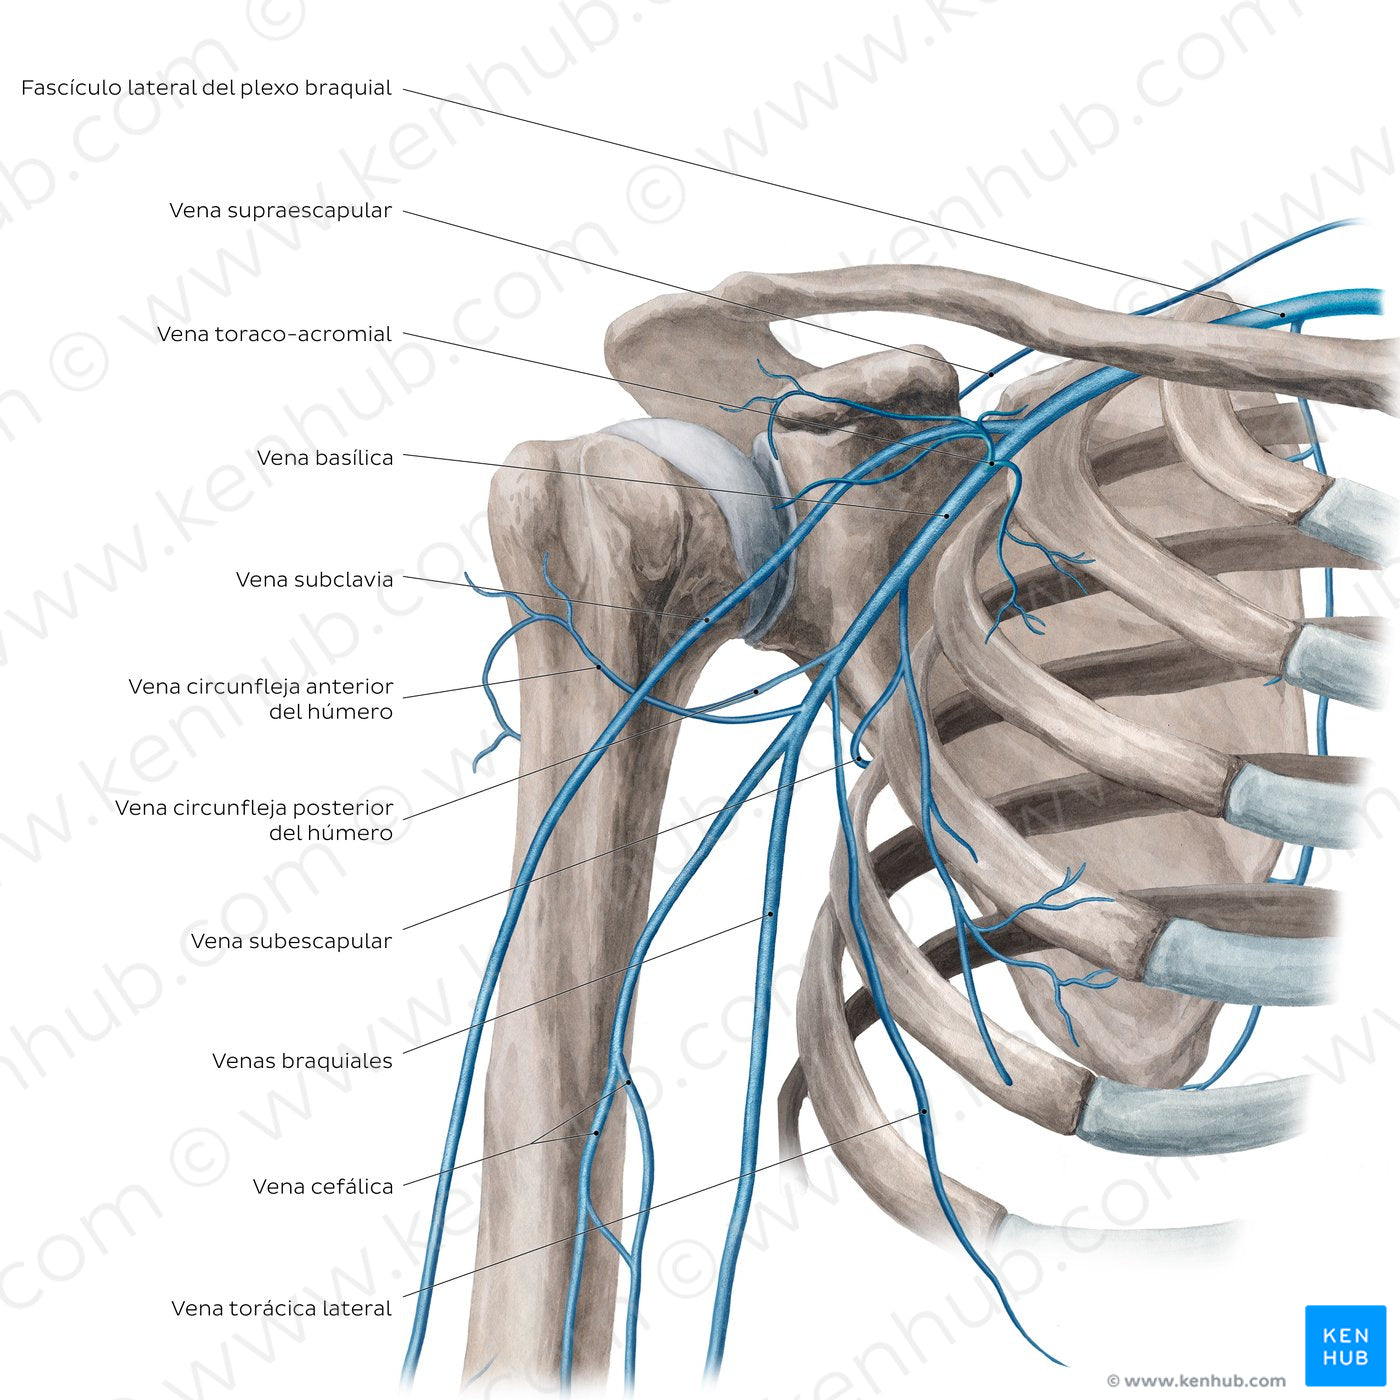 Veins of the arm and the shoulder - Anterior view (Spanish)